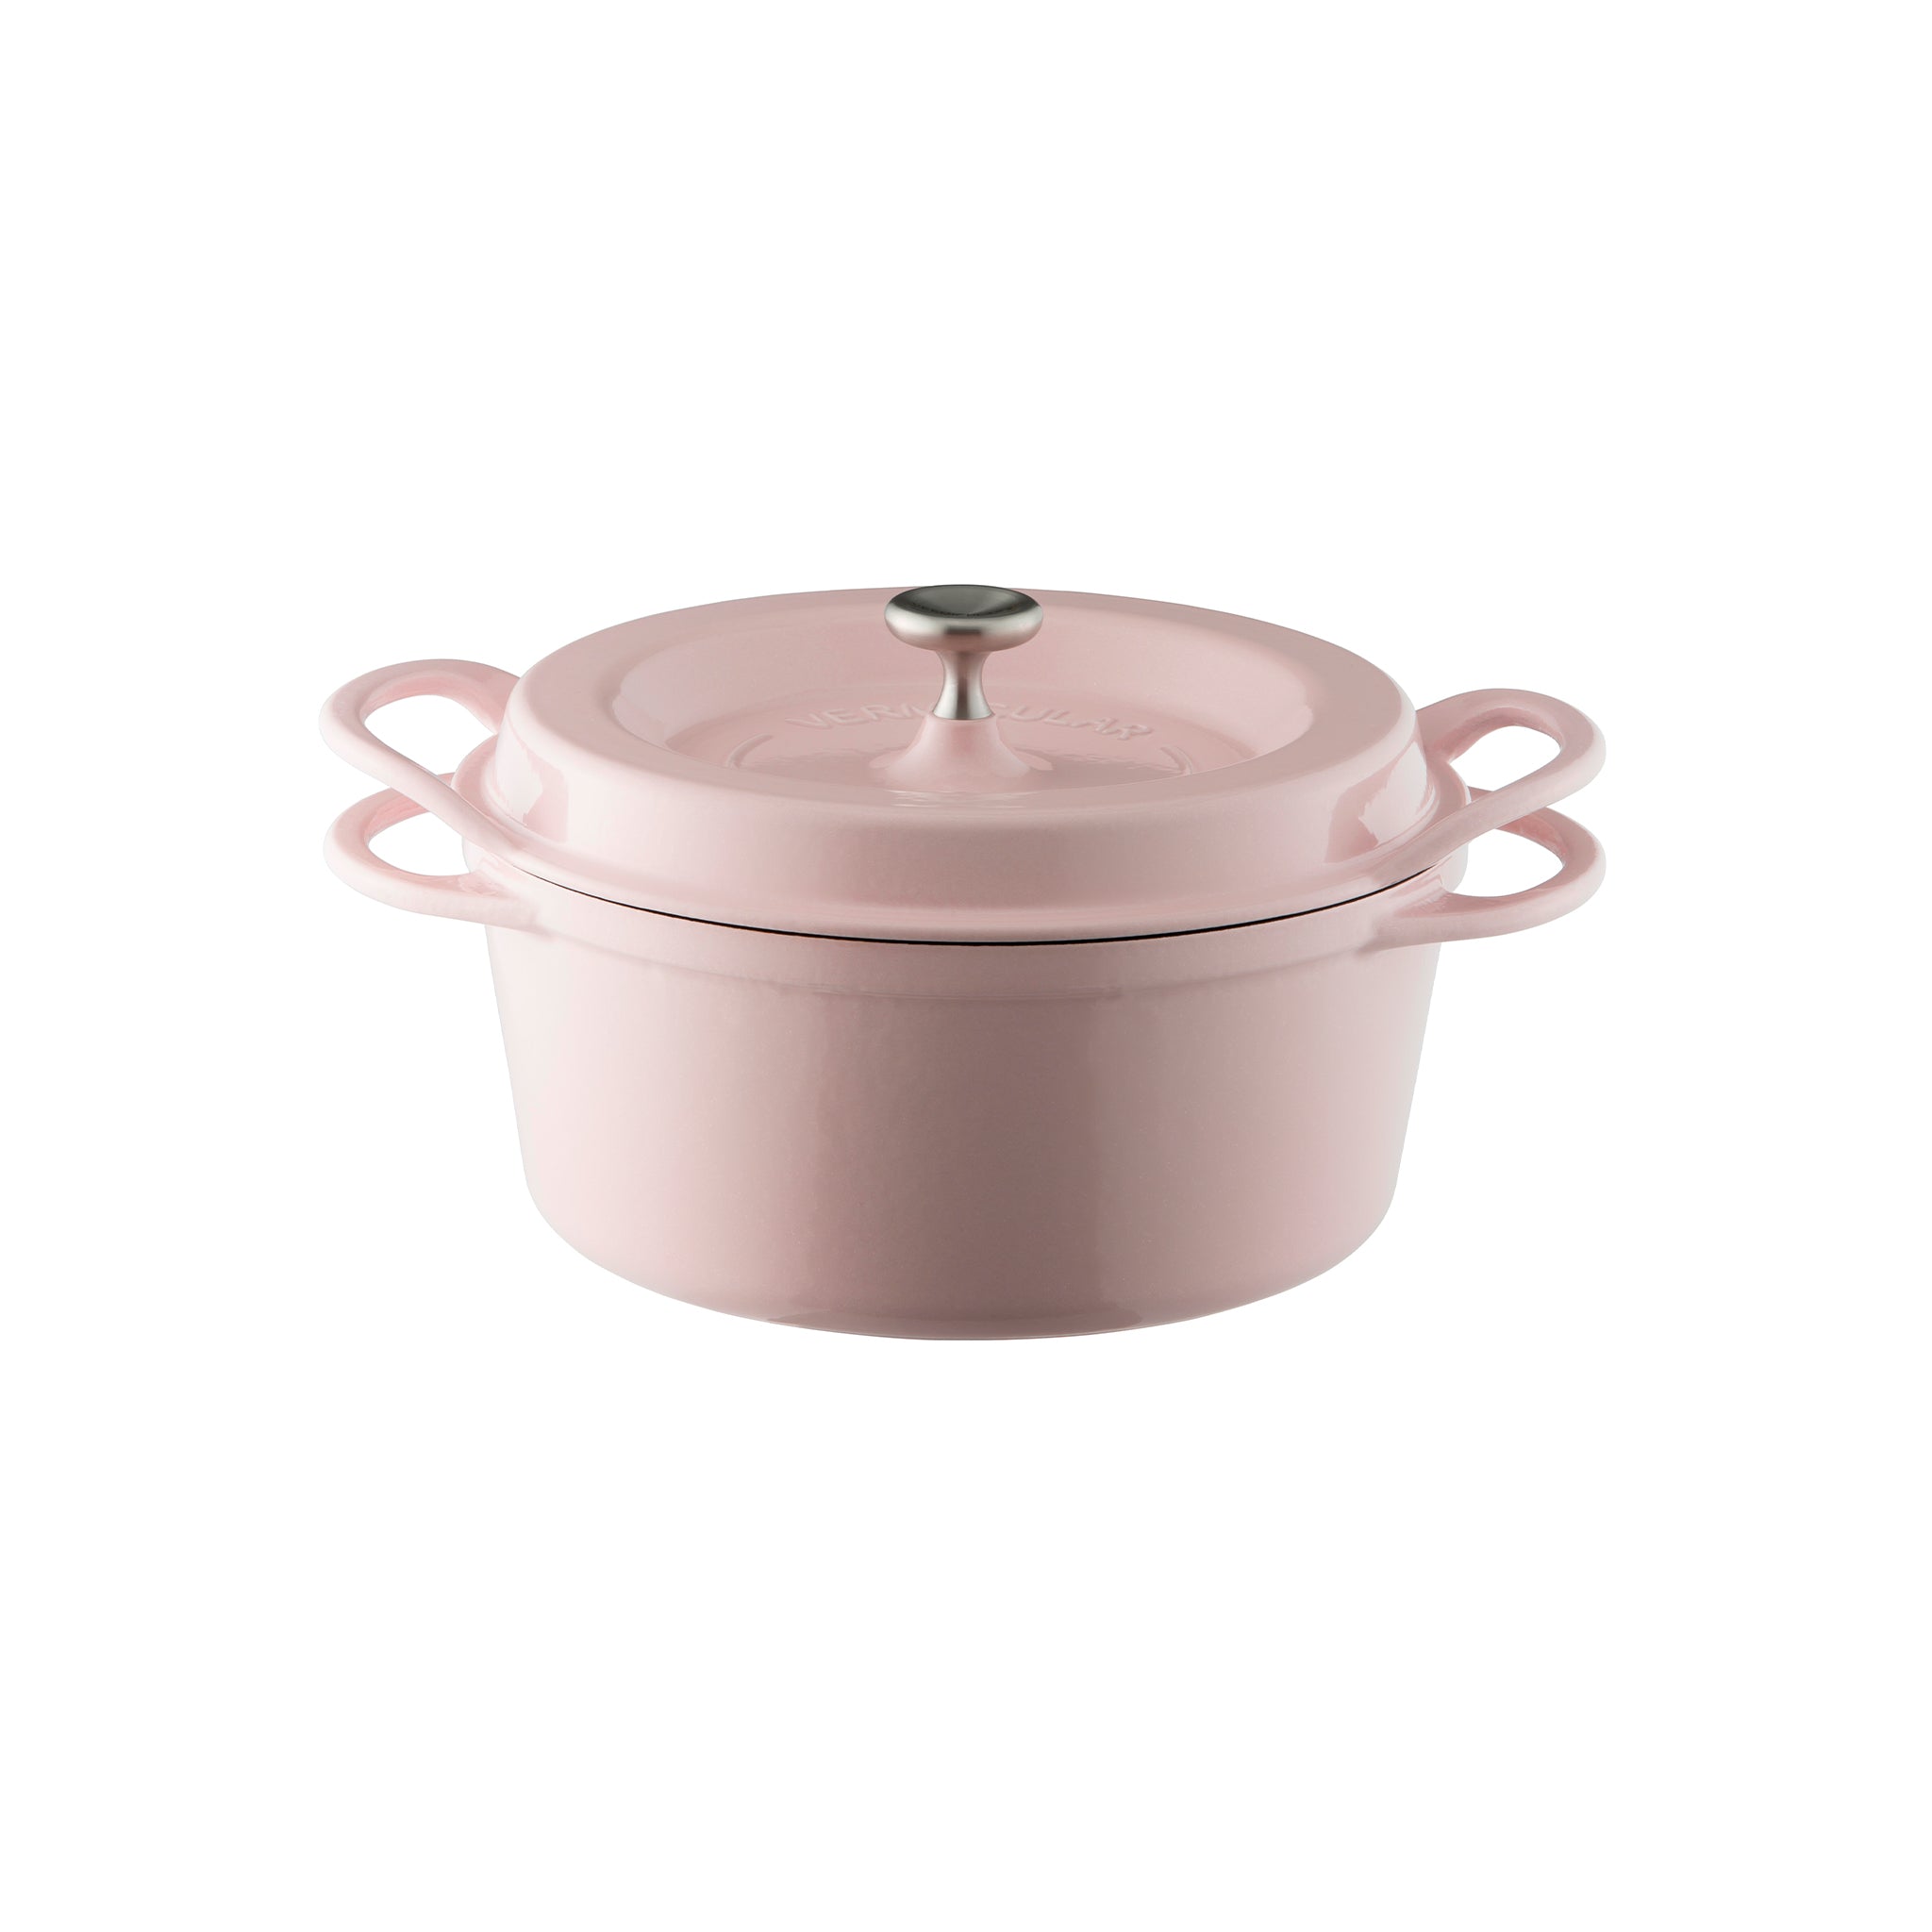 Vermicular Japanese Cast Iron Oven Pot, 5 Sizes & 4 Colors on Food52